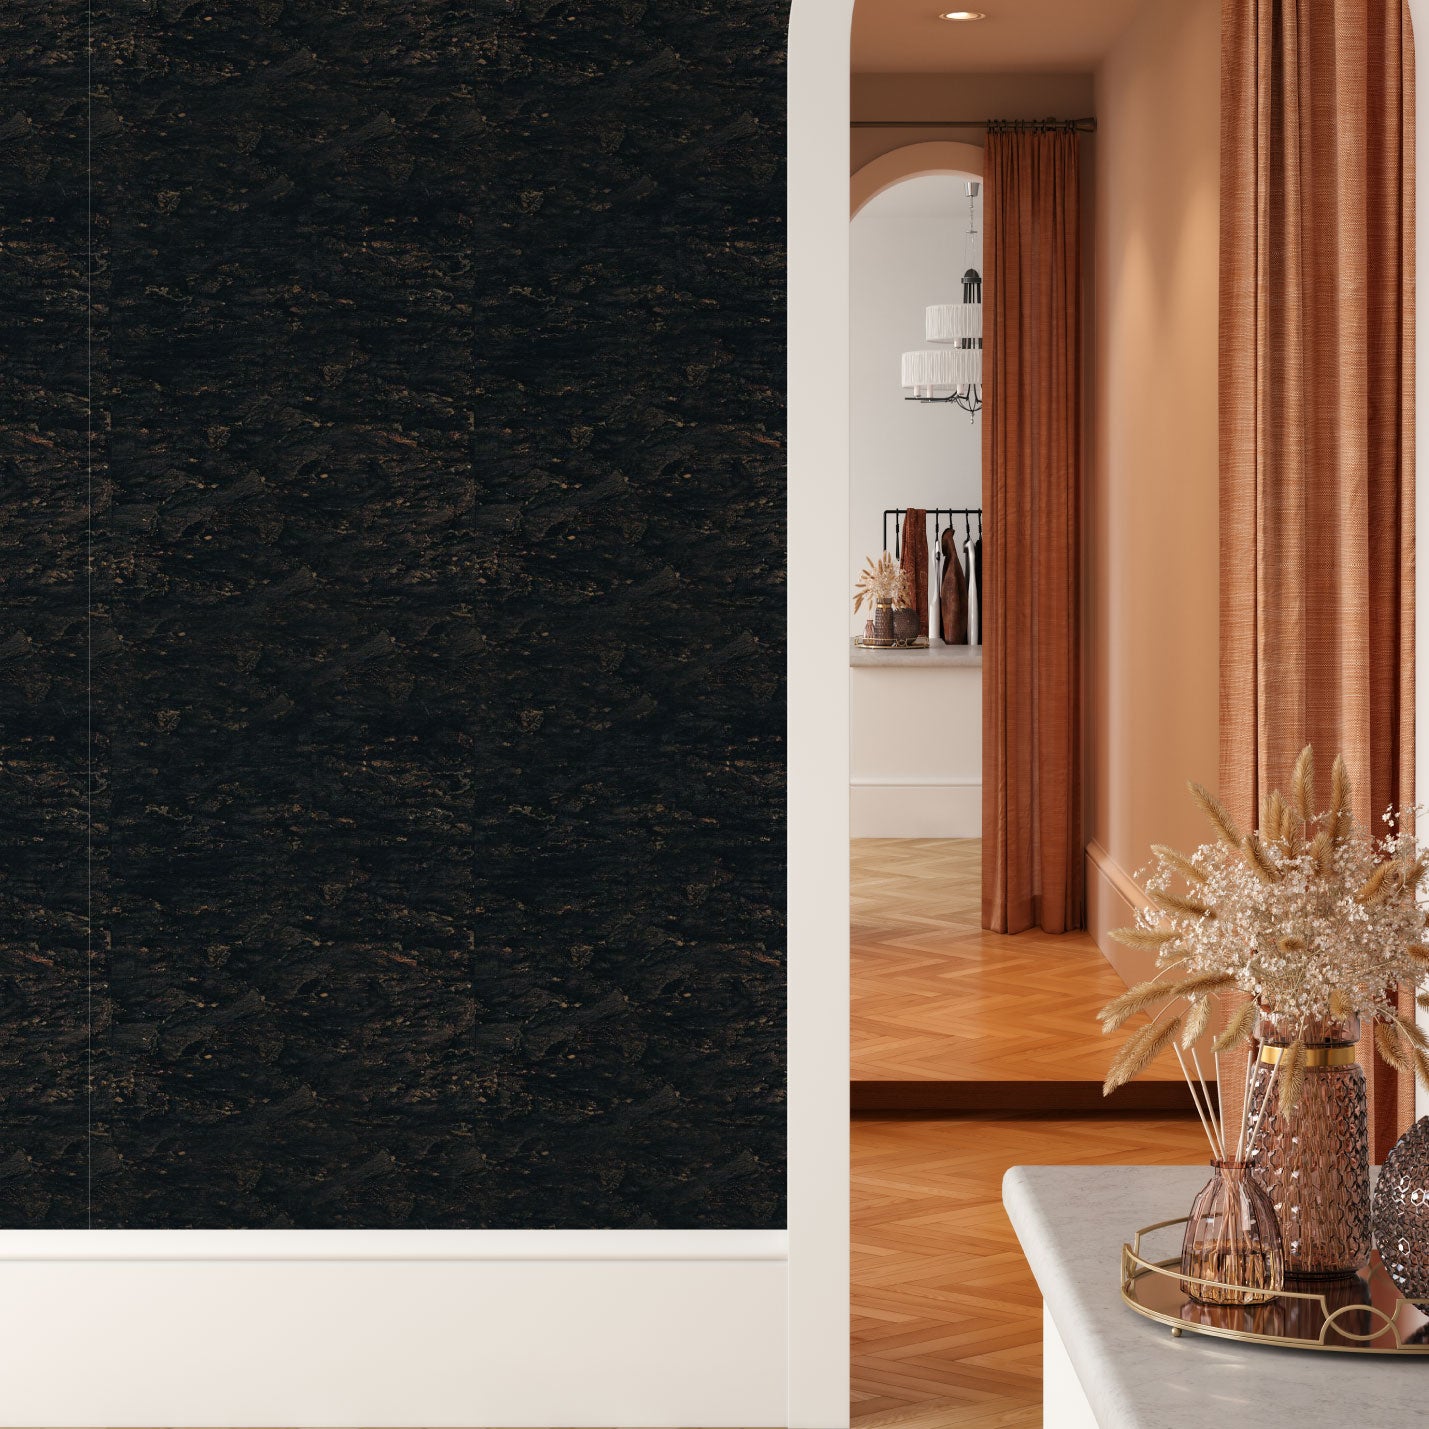 Natural Textured Eco-Friendly Non-toxic High-quality Sustainable practices Sustainability Interior Design Wall covering Bold Wallpaper Custom Tailor-made Retro chic cork nature luxury metallic shiny wood timeless coastal vacation interior design grain high-end dark brown black